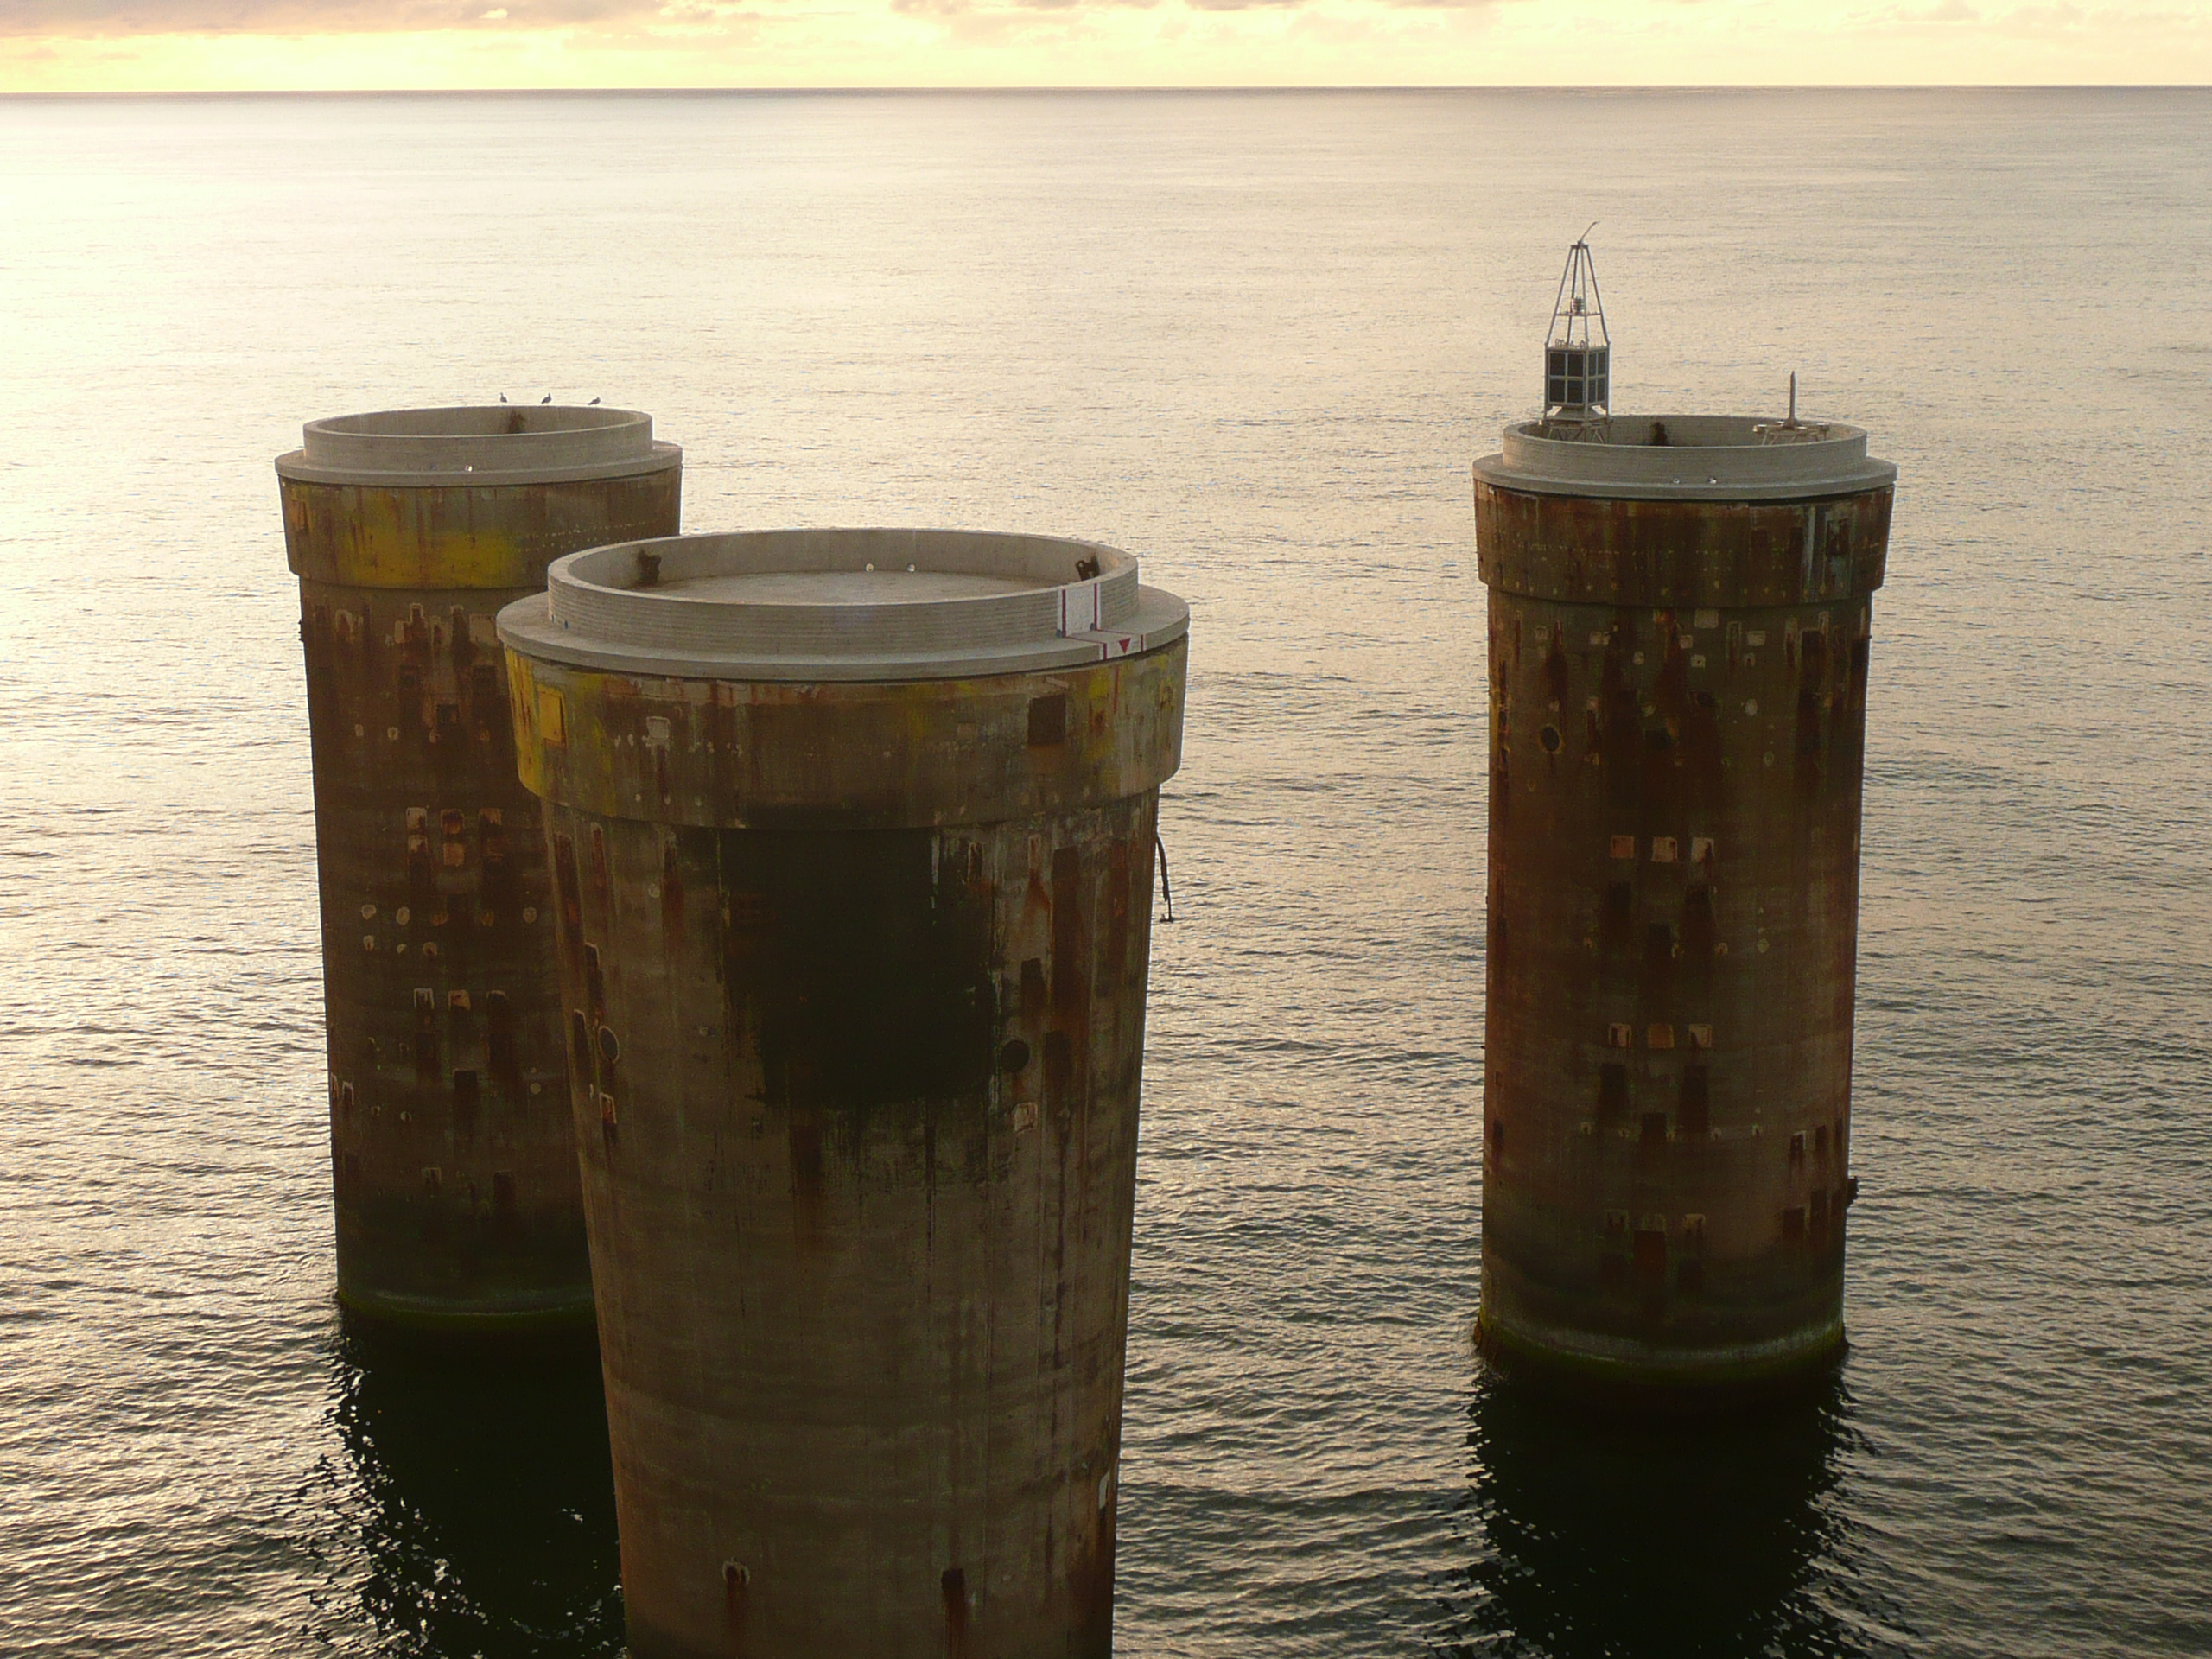 Figure 4: The remains of the concrete platforms left on Frigg field in the North Sea. © Total E&P Norge.